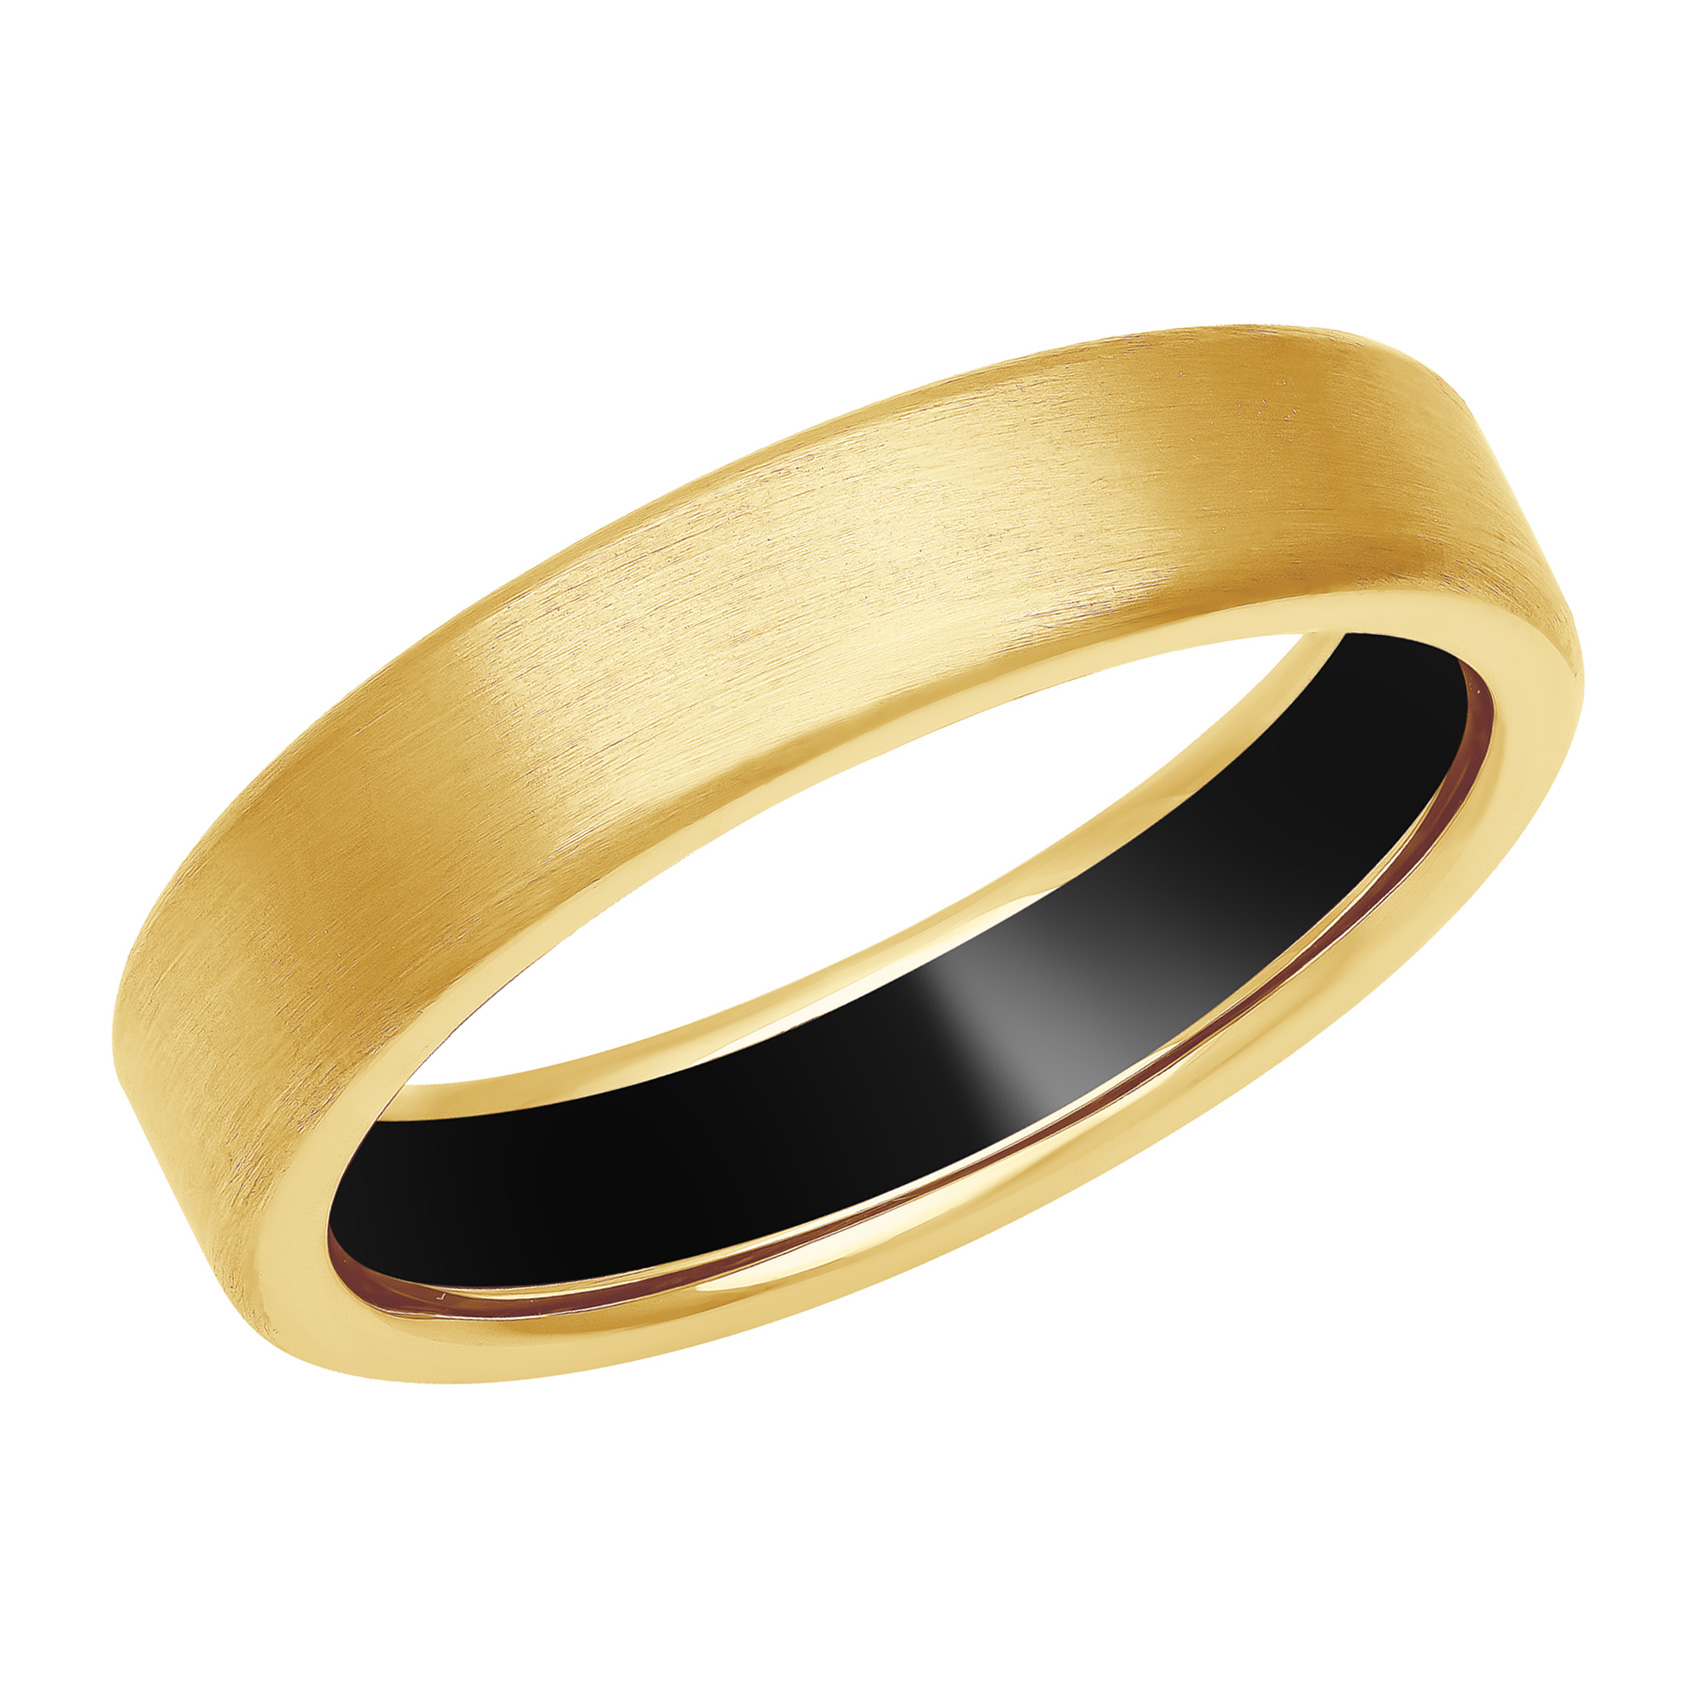 Yellow Gold with Black Ceramic Interior Wedding Band | 5mm | Men's | Size 13